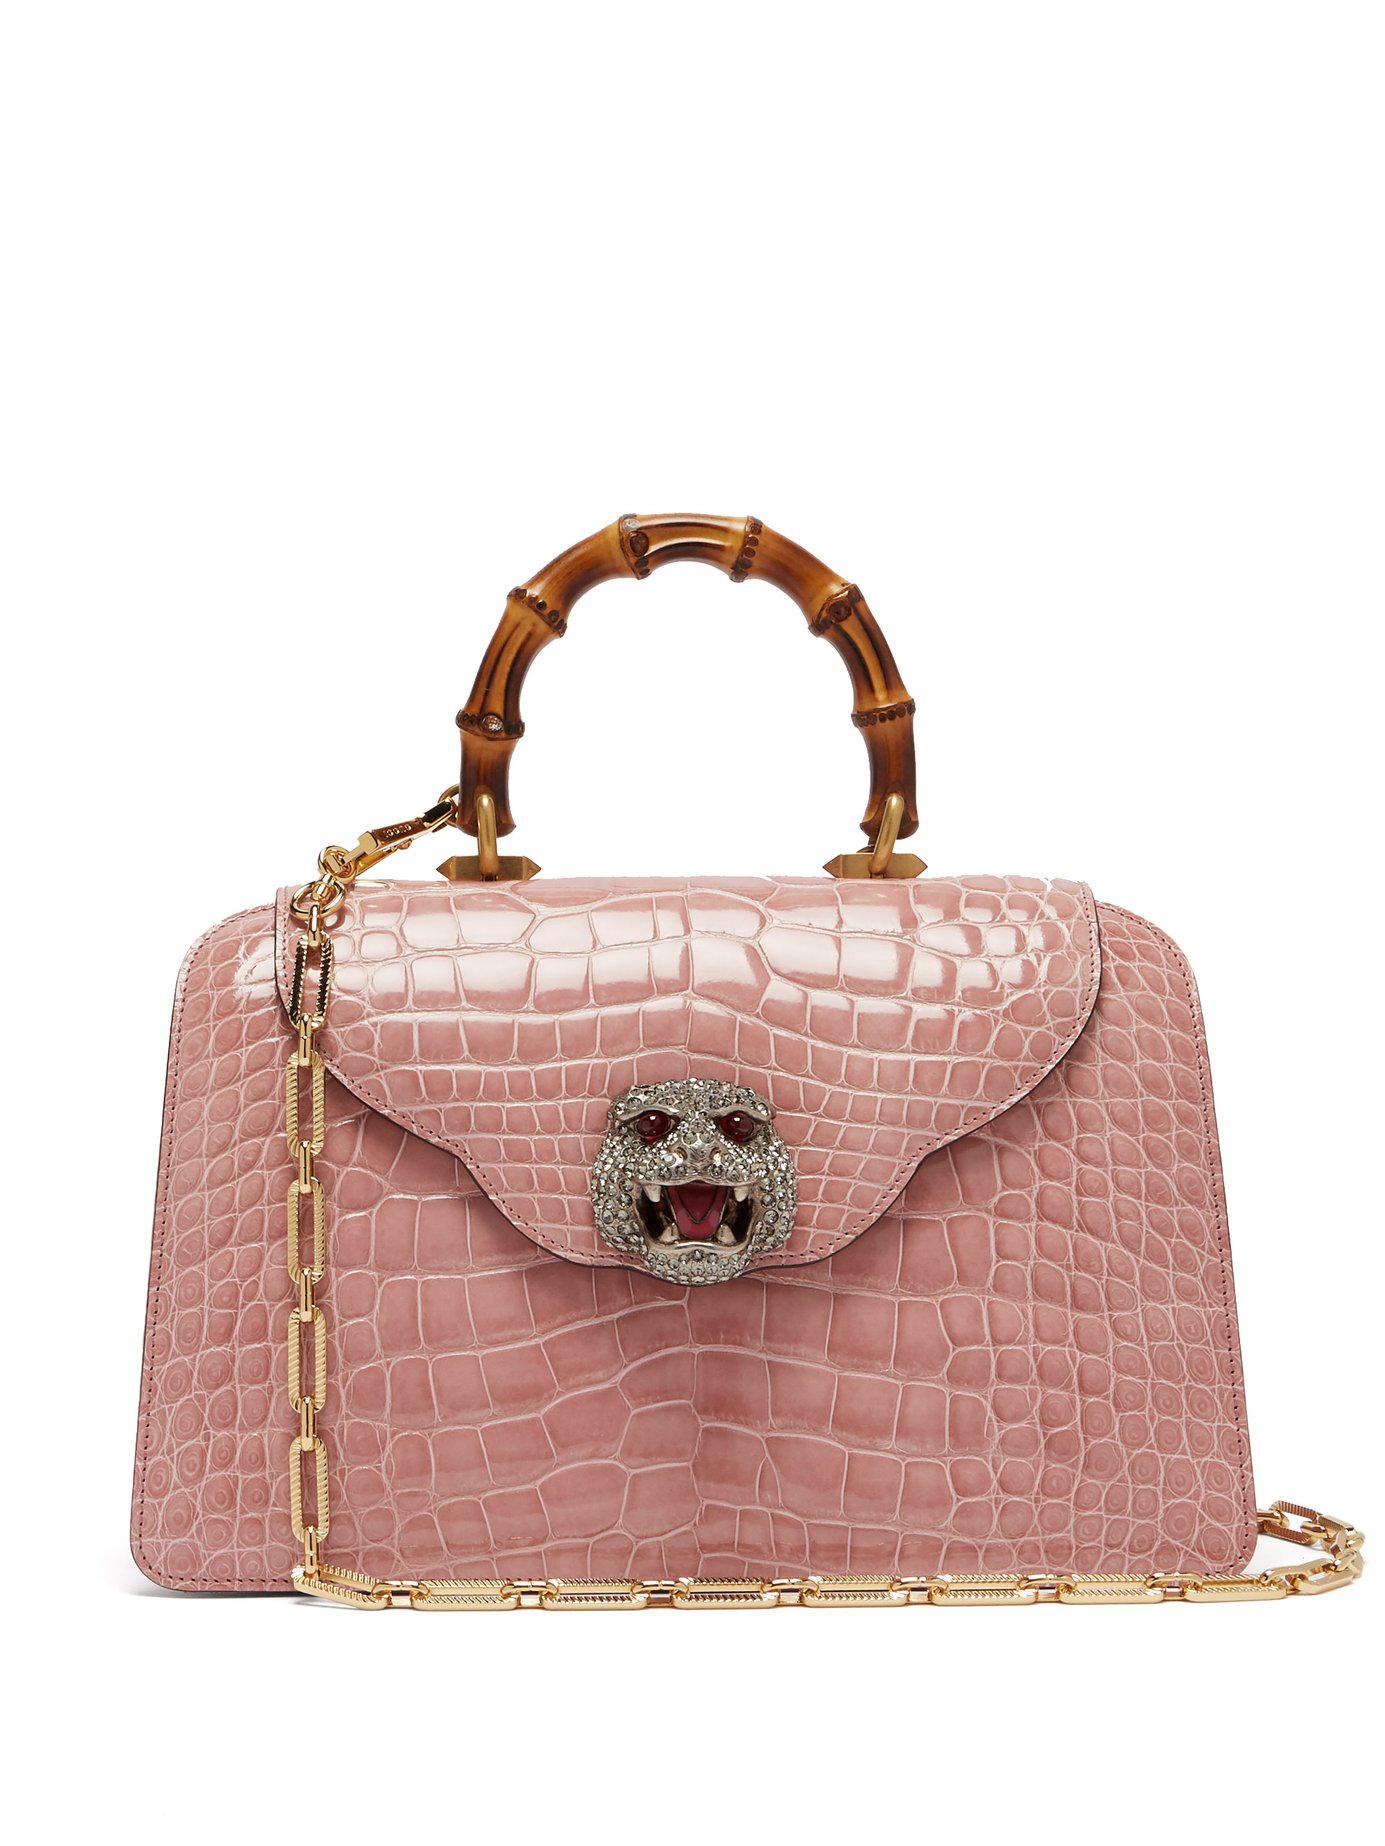 Gucci Bamboo Handle Crocodile Leather Bag in Pink Lyst